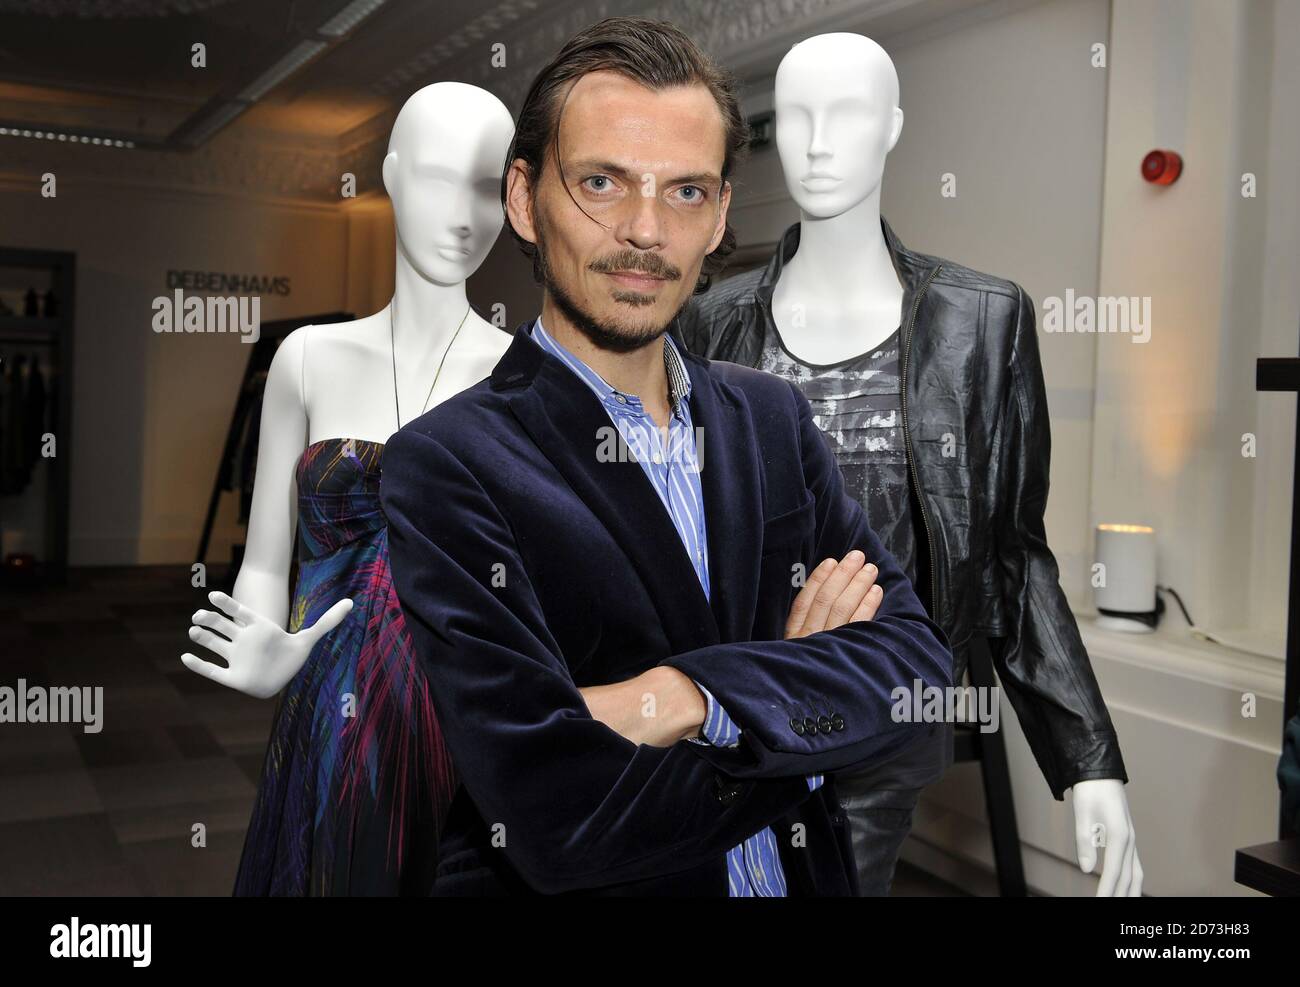 Matthew Williamson attending the launch party for the new Designers at Debenhams fashion collections for Autumn Winter 2009, held at 33 Wigmore ST in central London.  Stock Photo